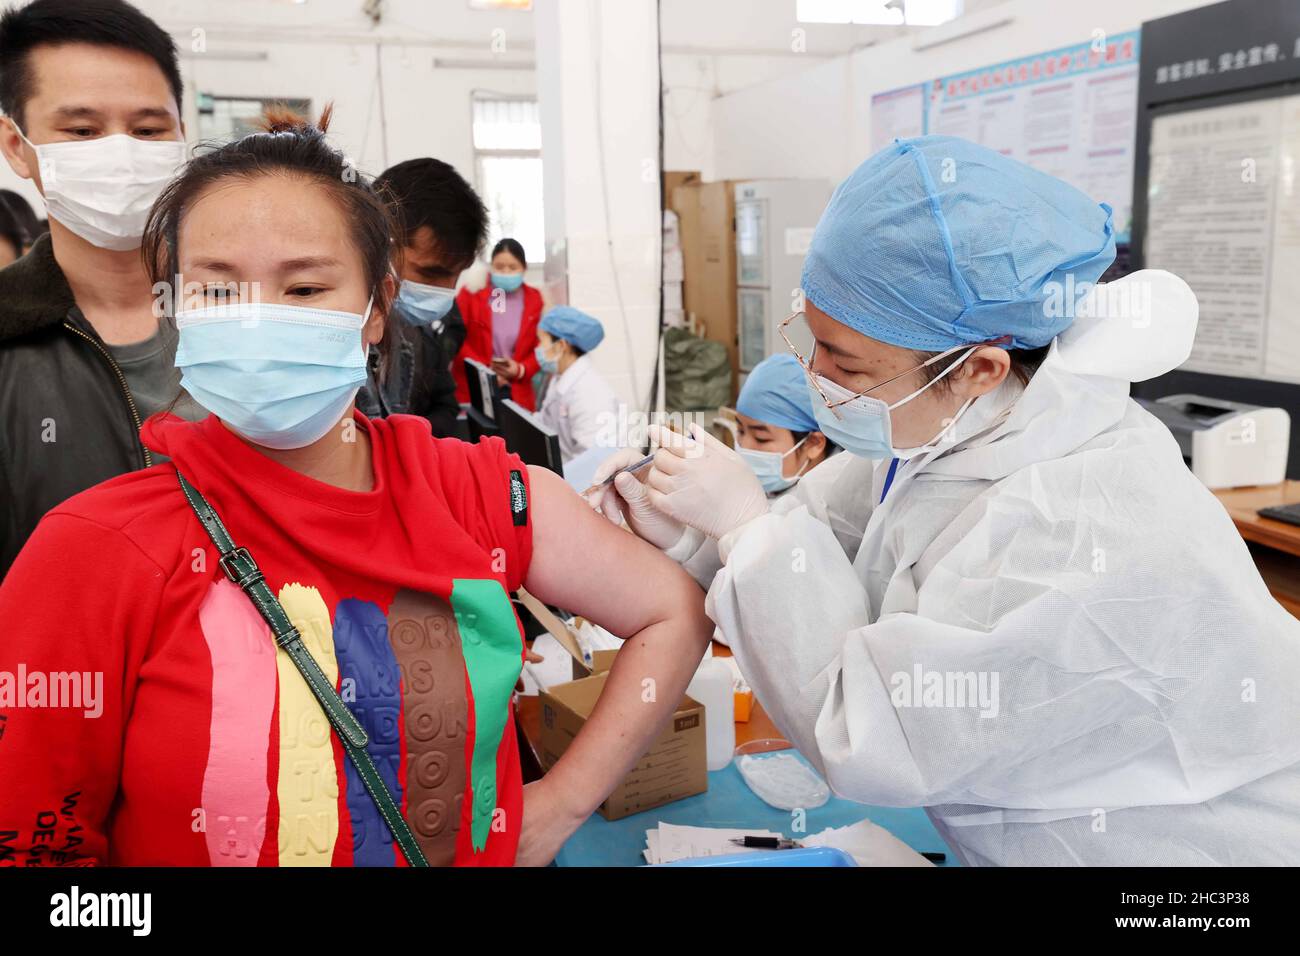 LIUZHOU, CHINA - DECEMBER 12, 2021 - Medical workers administer 'booster needle' at a centralized vaccination site for COVID-19 vaccine in Liuzhou, Gu Stock Photo